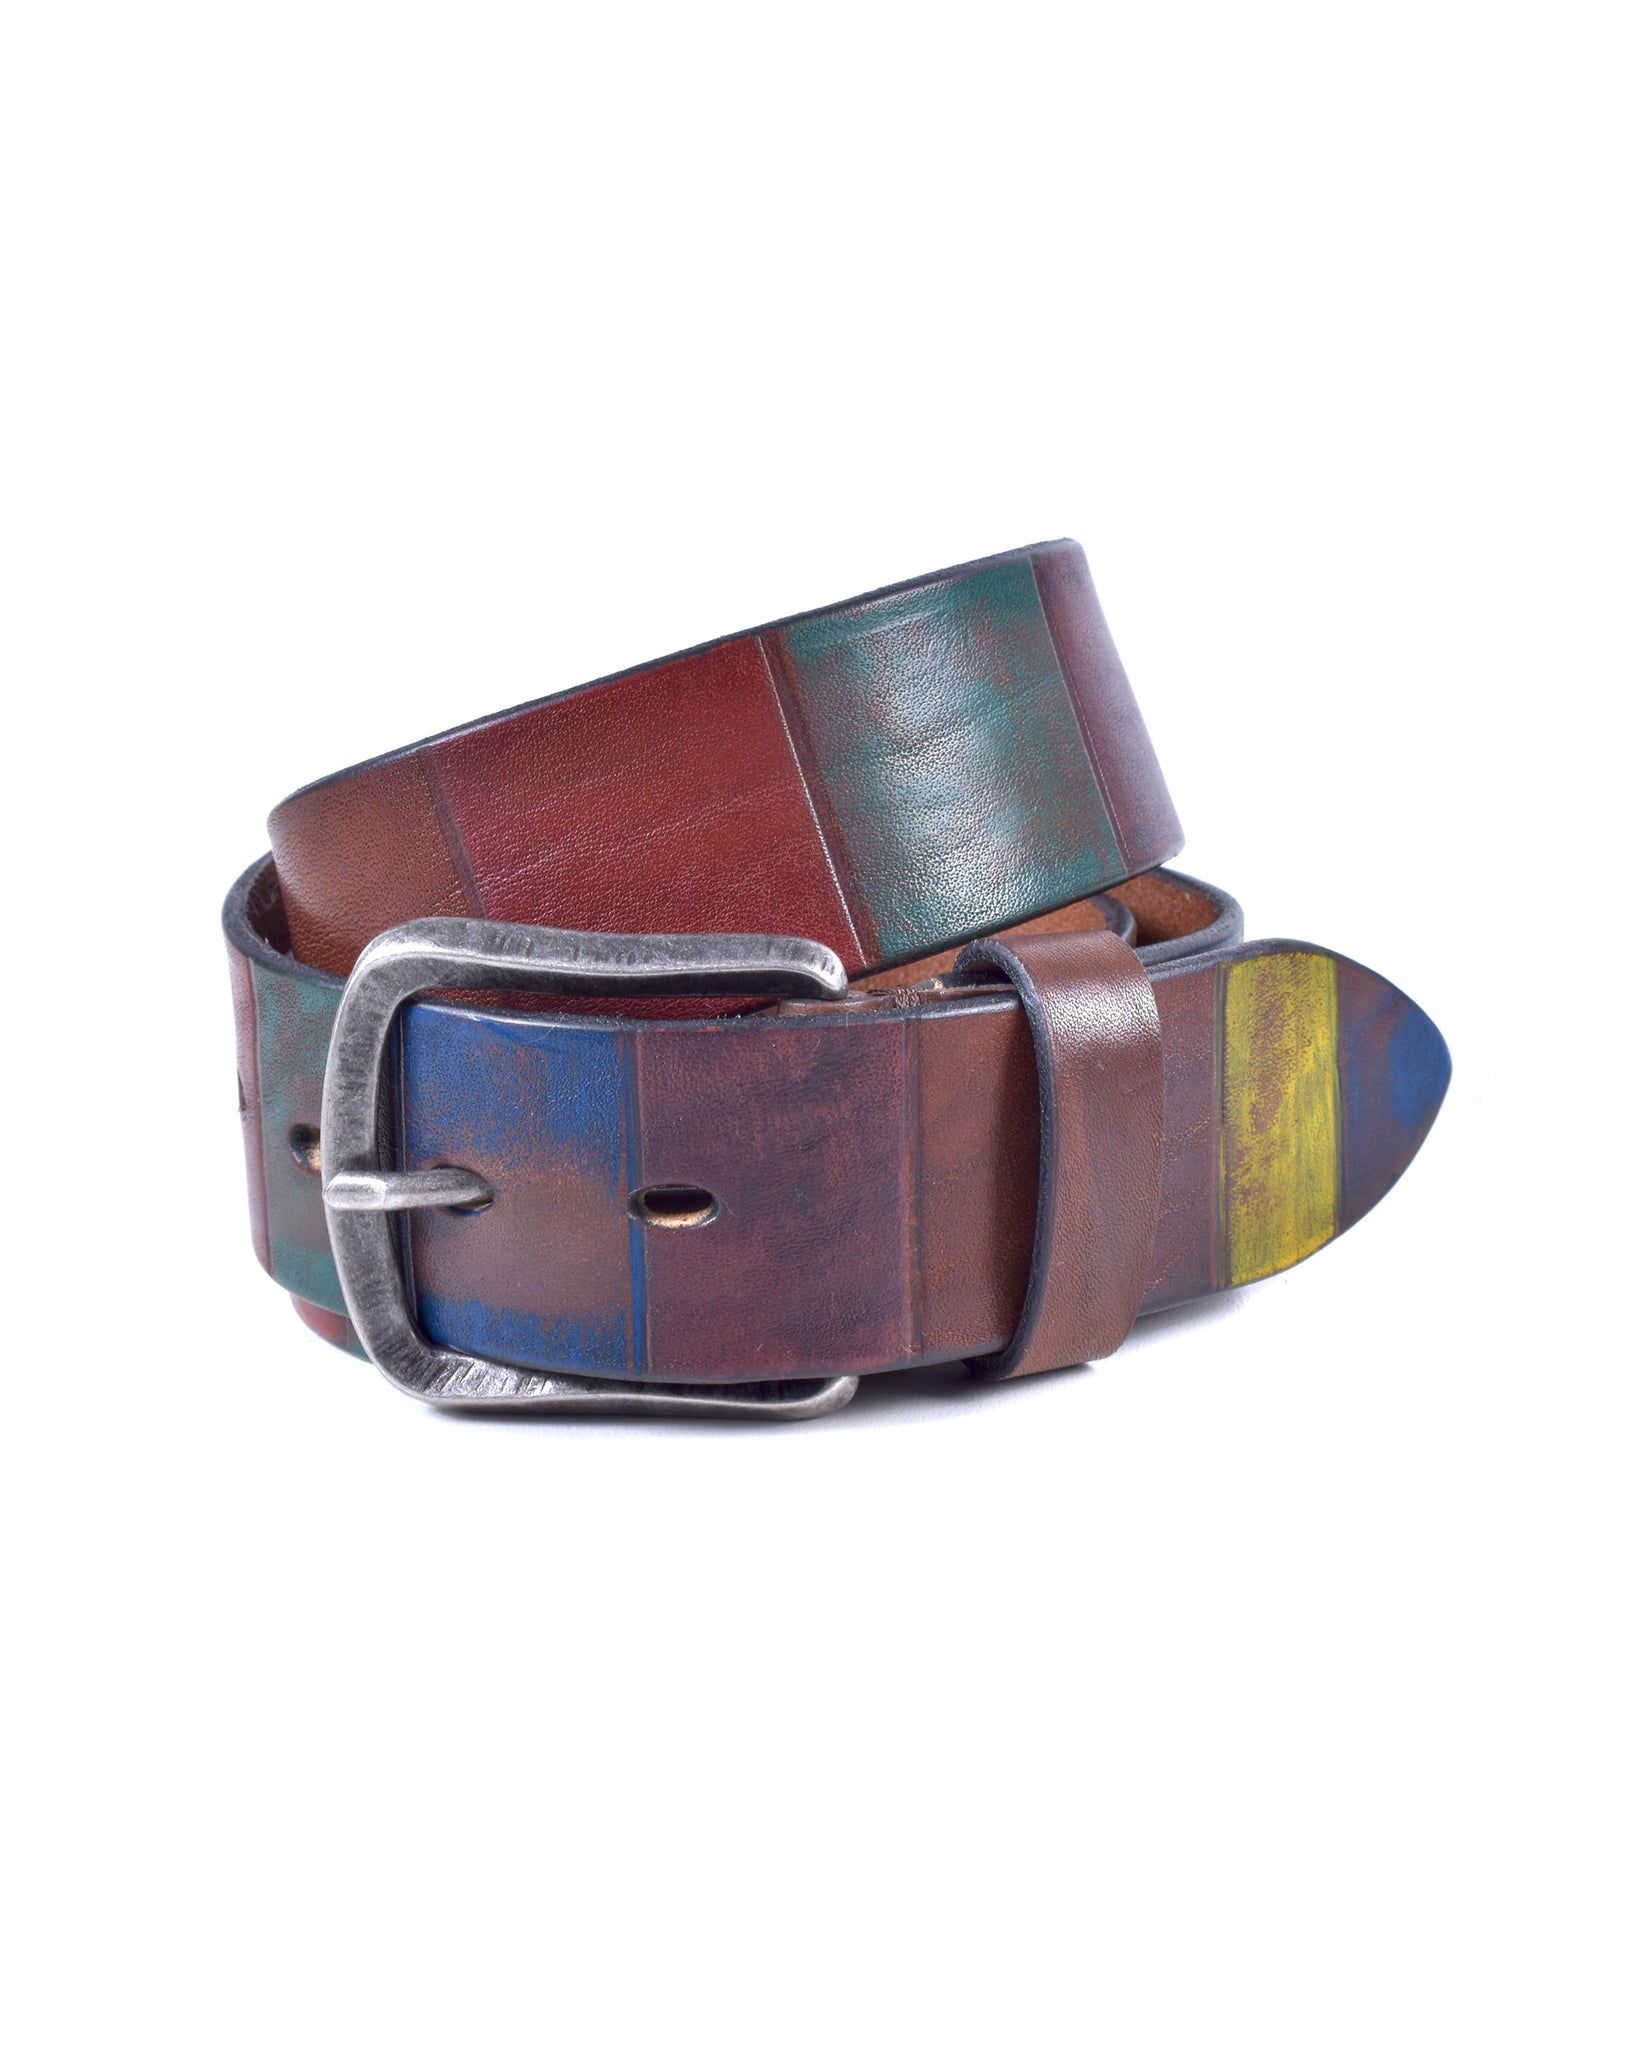 Miguel Bellido Hand Painted Leather Belt